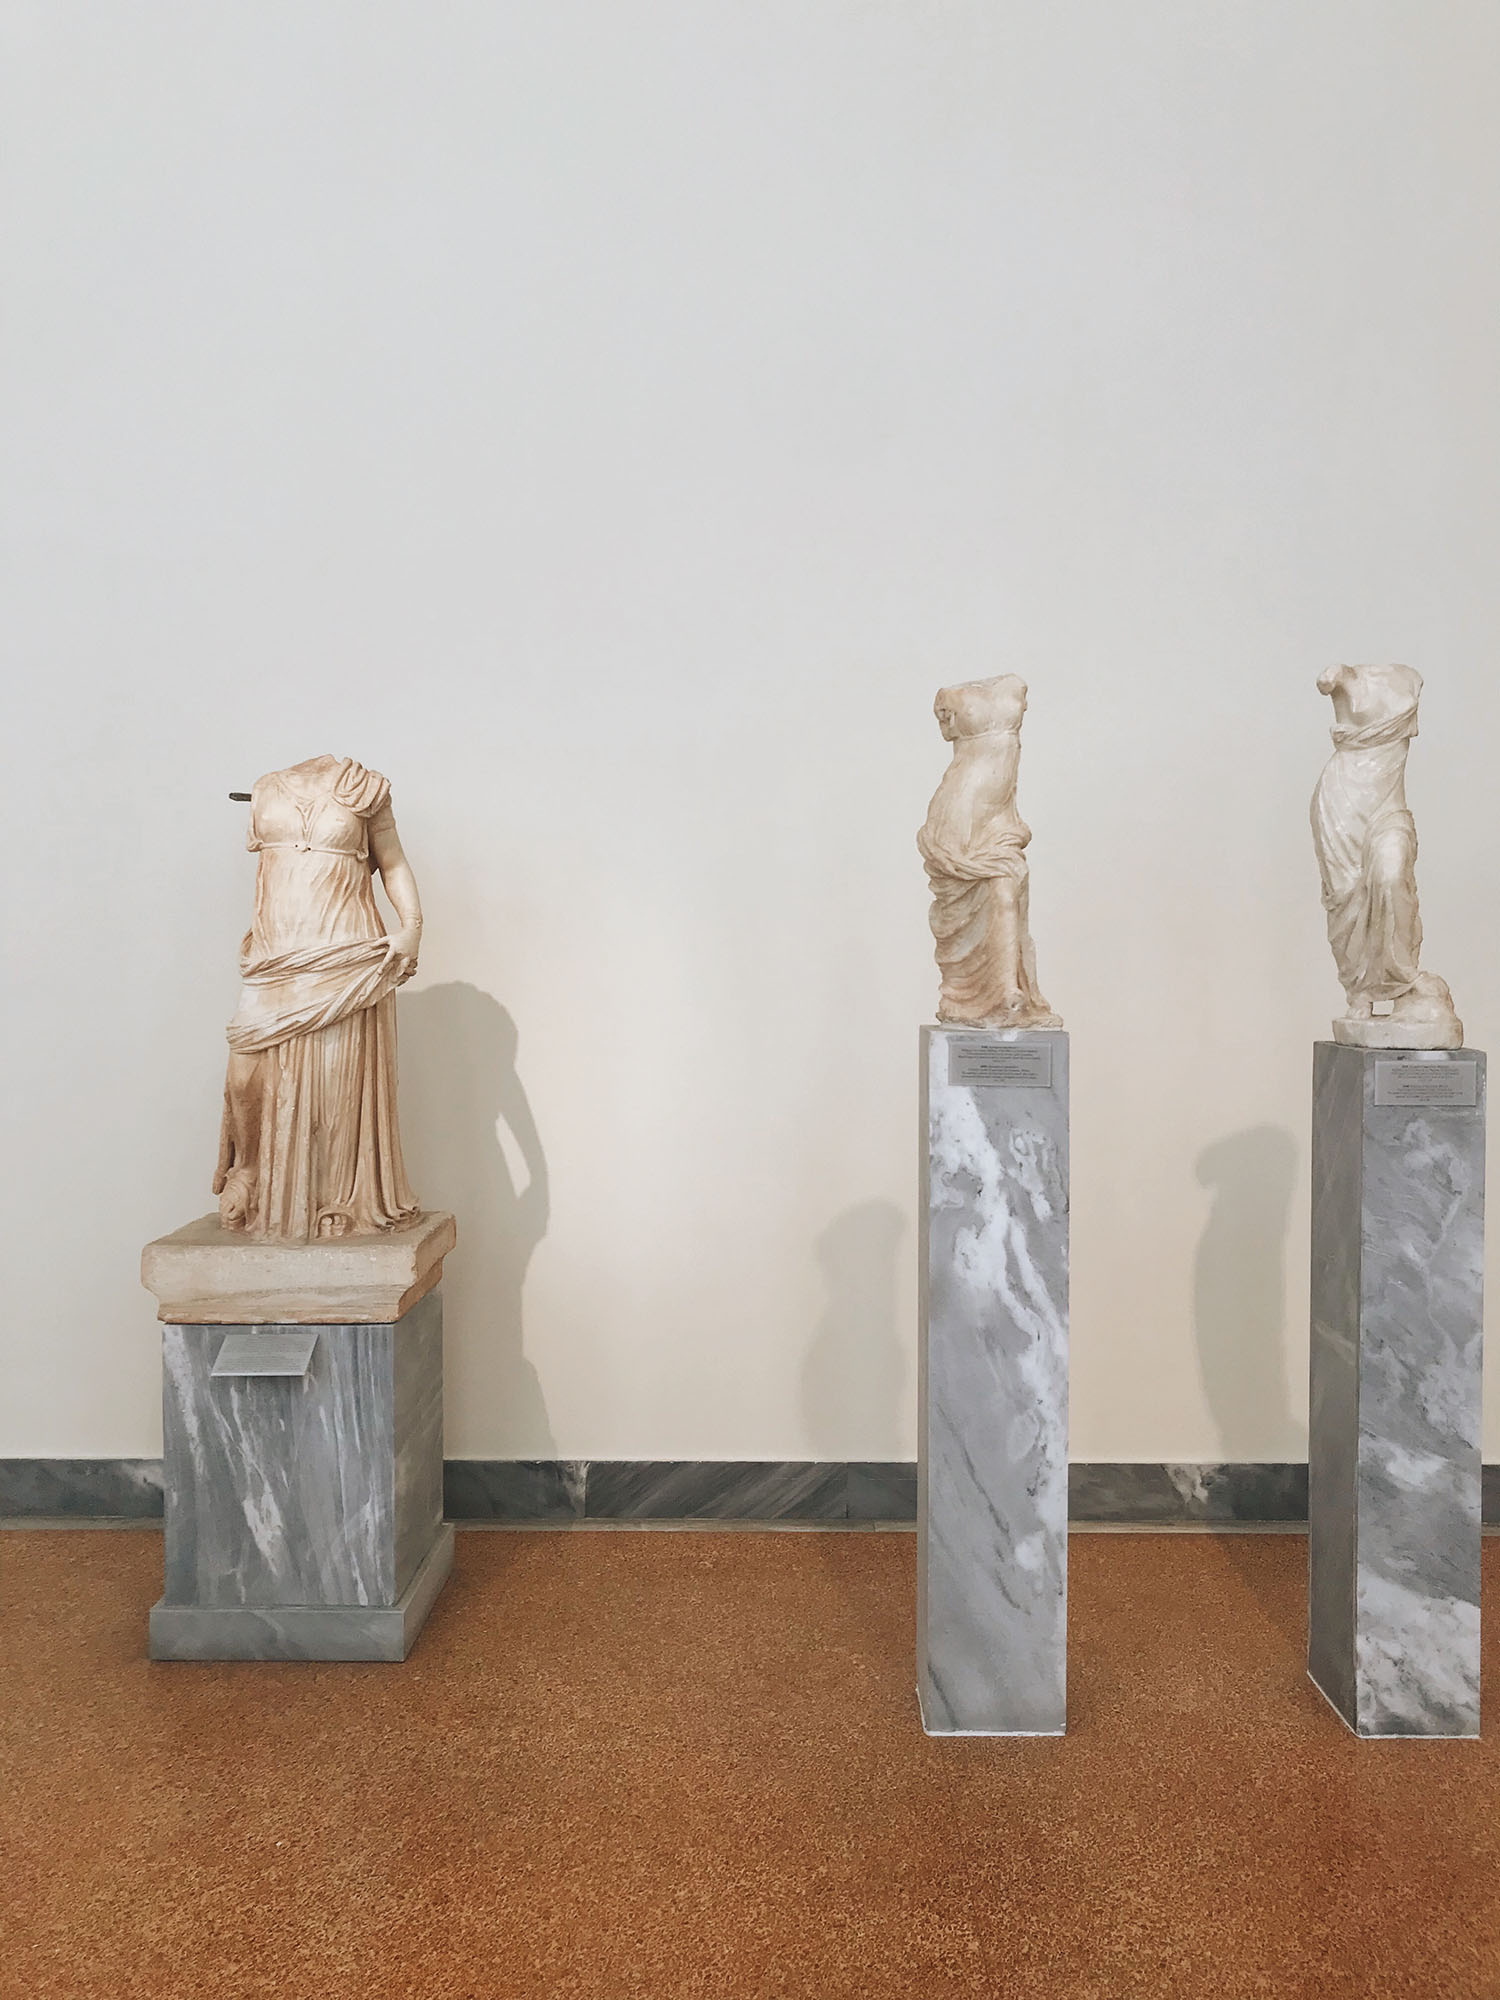 Coco & Vera - Marble statues at the National Archeological Museum in Athens, Greece